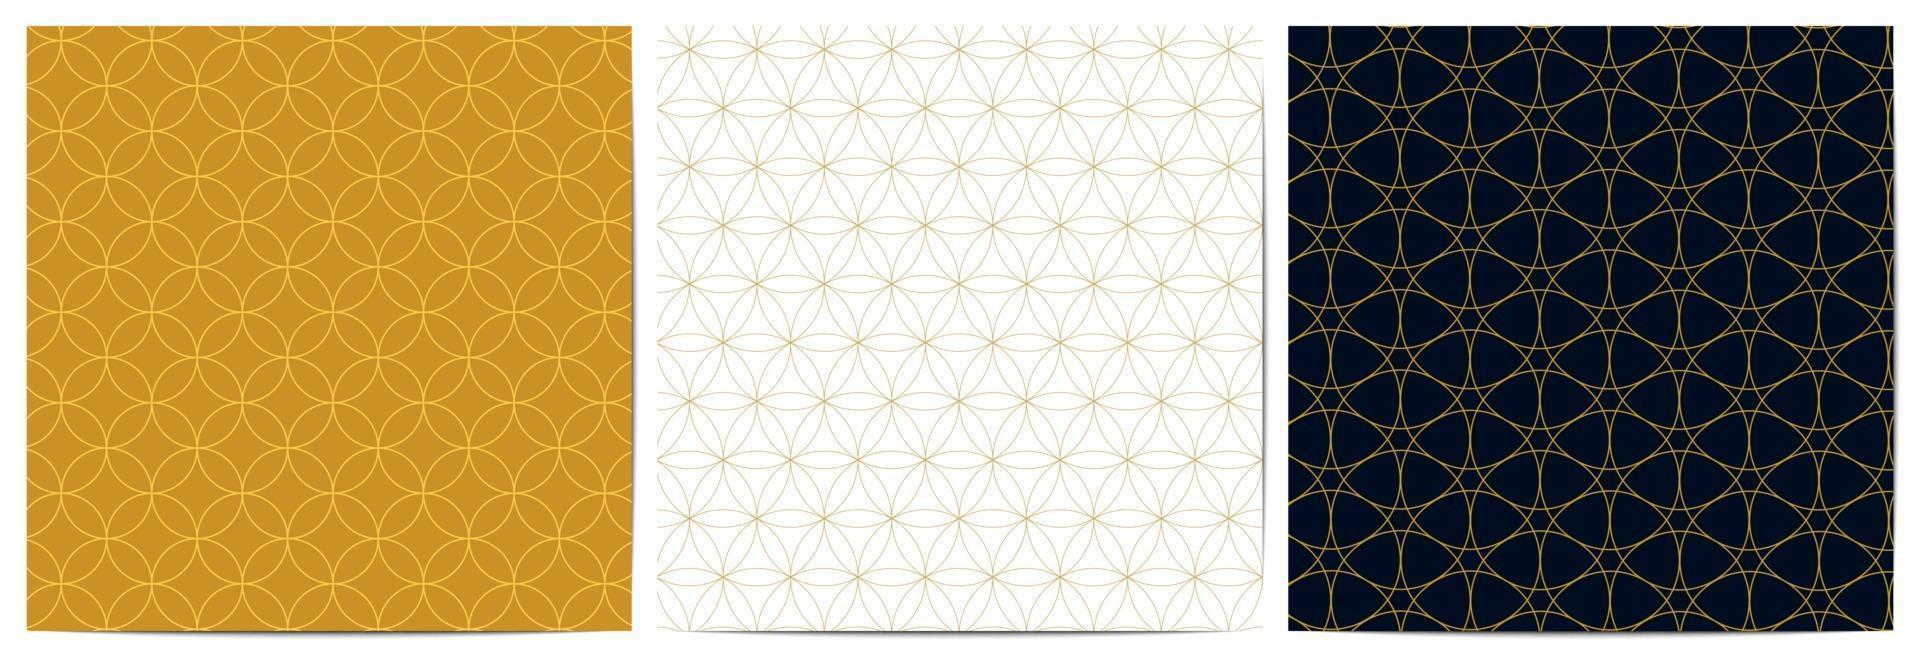 Geometric pattern circle overlapping luxury of gold lines vector